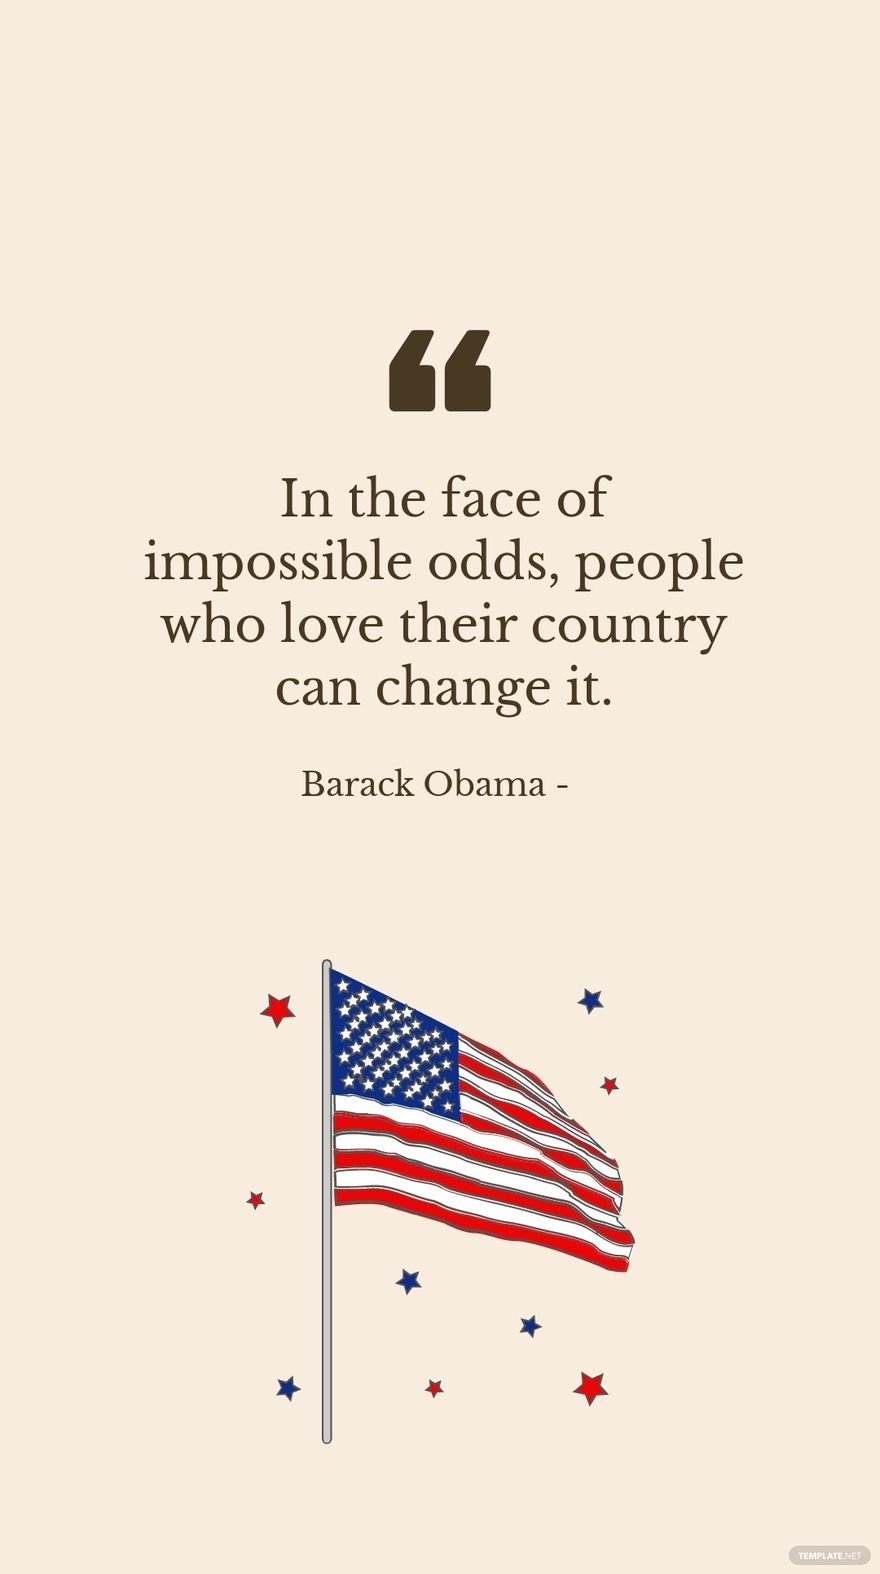 Barack Obama - In the face of impossible odds, people who love their country can change it.